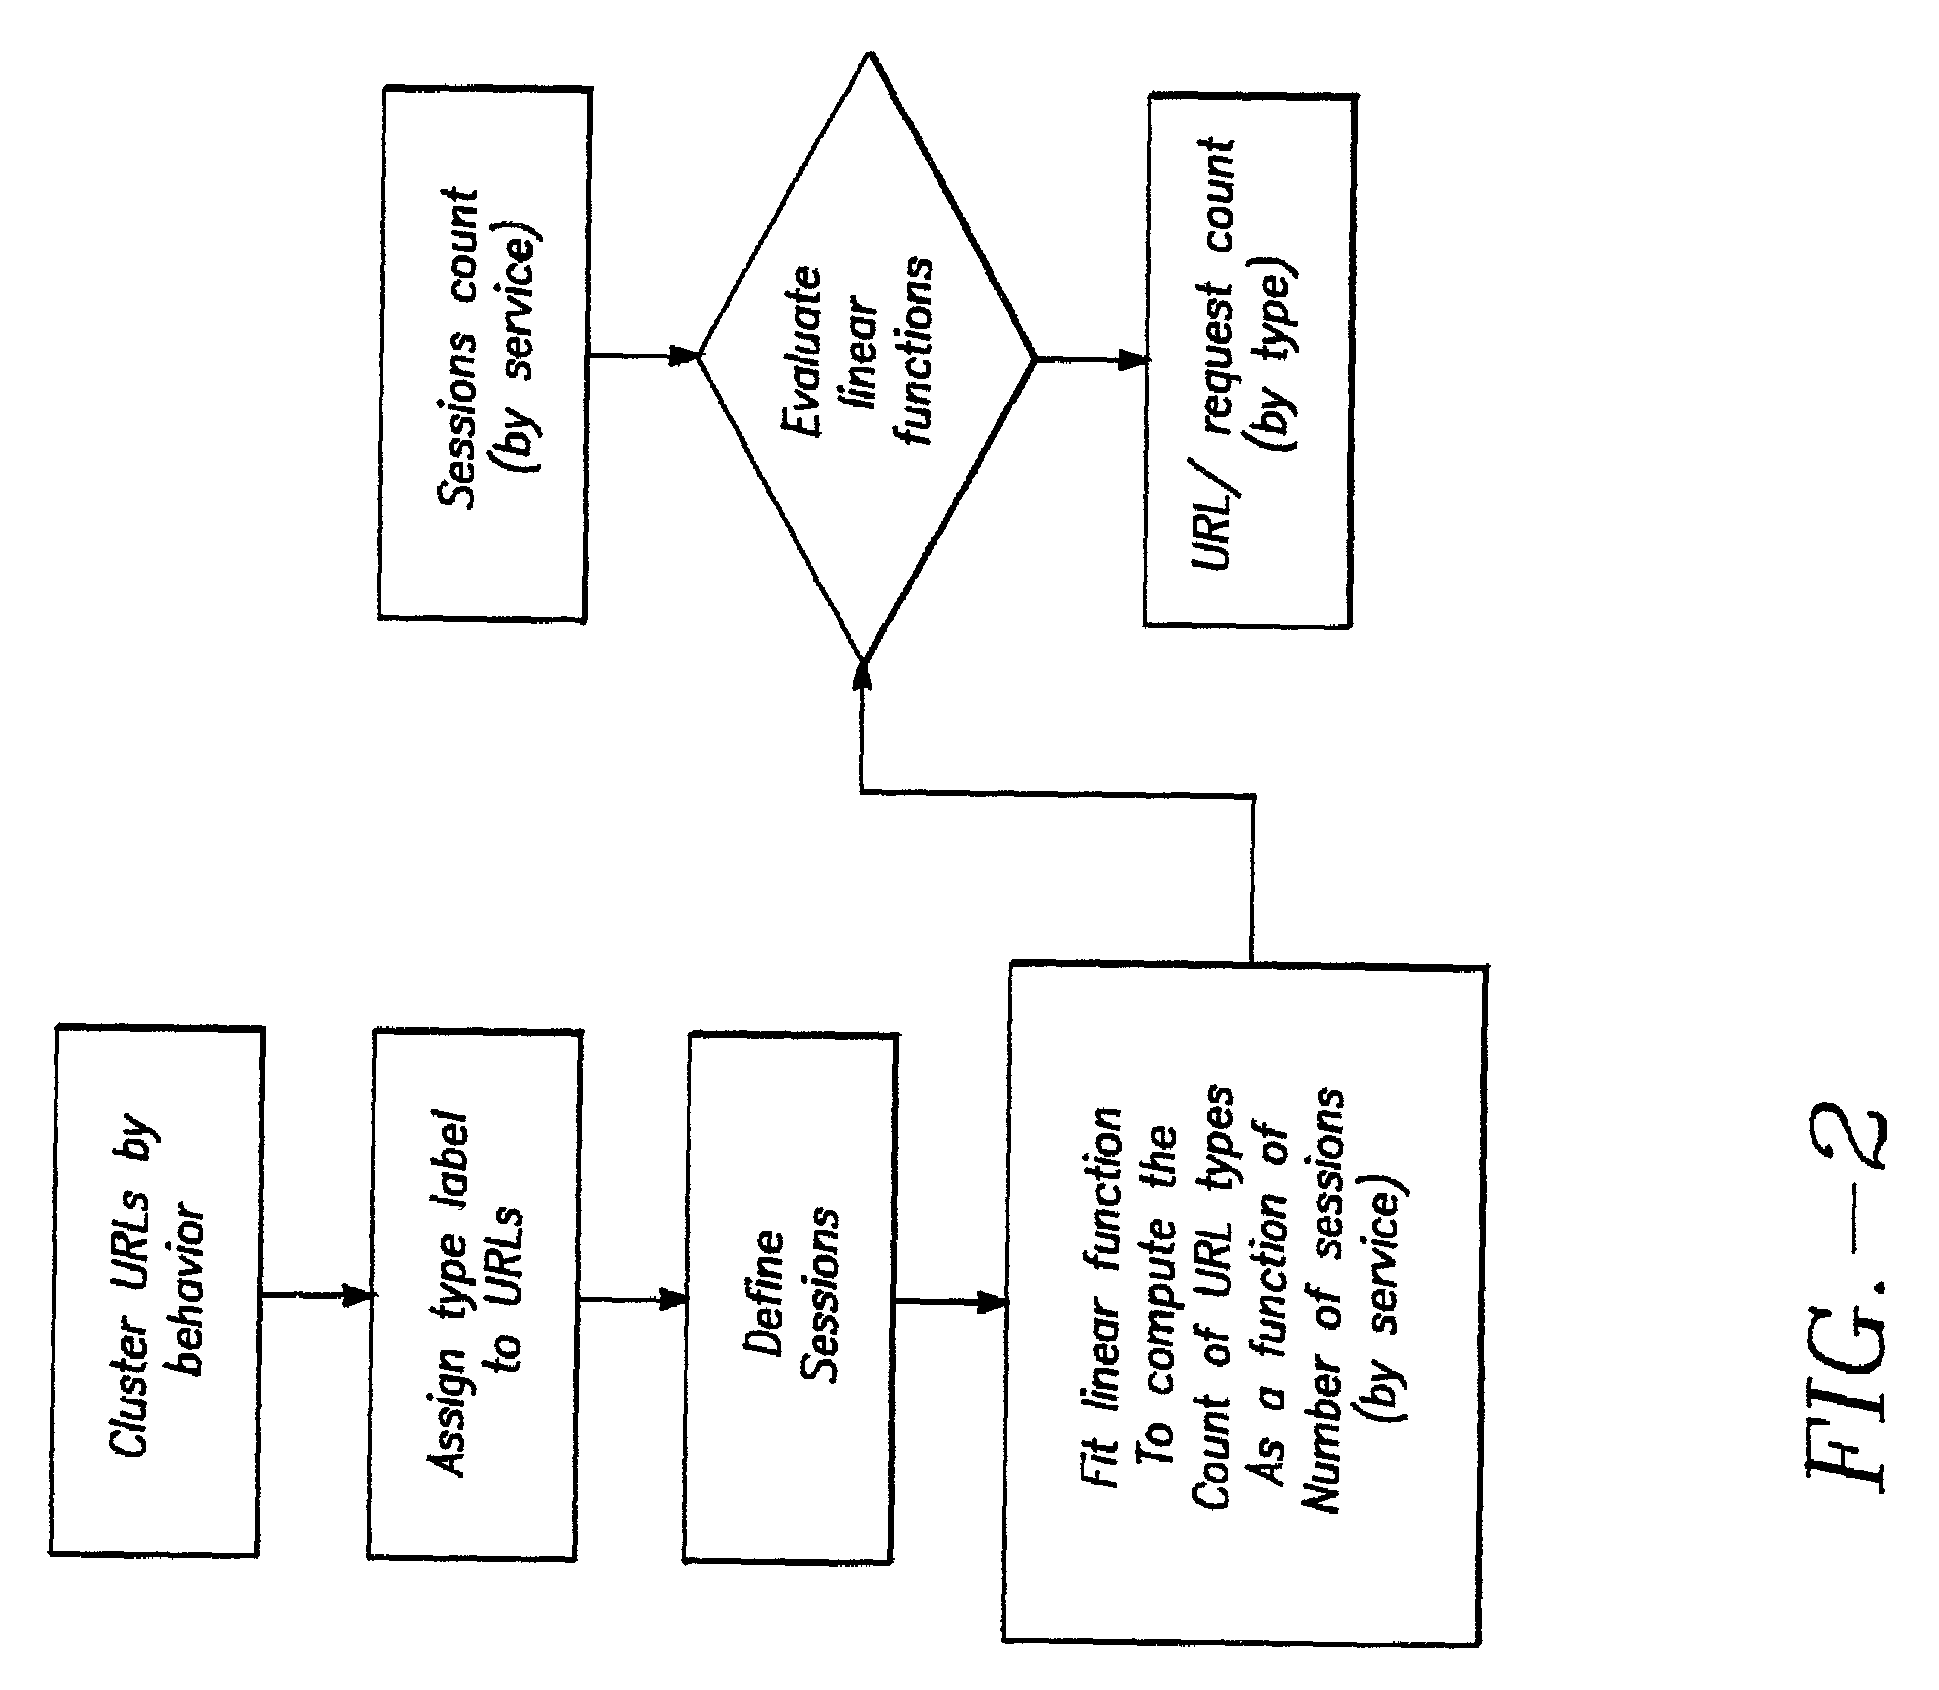 System and method for modeling information system capacity and accepting sessions in an information system